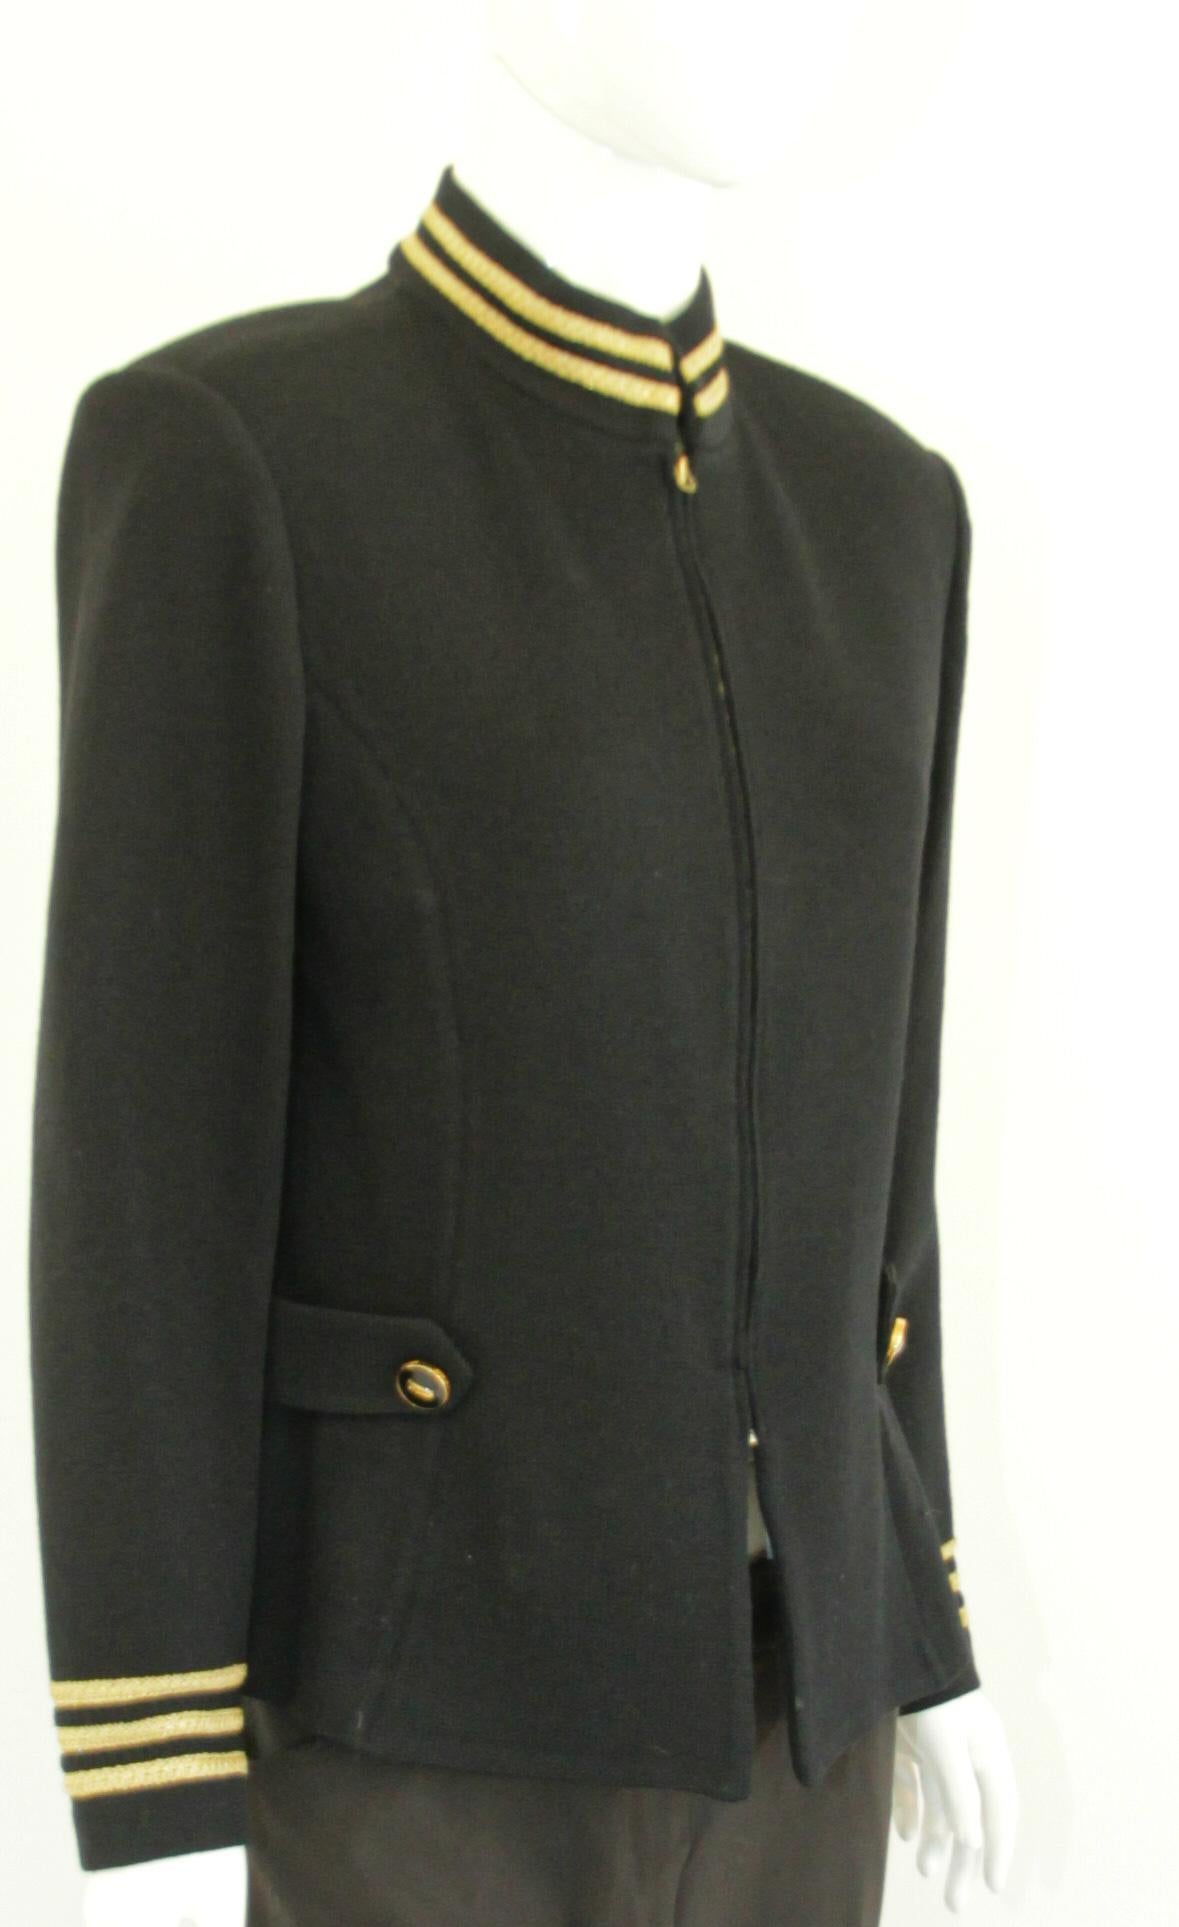 St. John Military Blazer Knit Jacket Navy Blue & Gold Wool Sweater Jacket, 1990's
Fashionable spin on a military look with this wool knit cardigan sweater that resembles a Navy jacket. The decorative gold at the collar, insignia buttons and at the